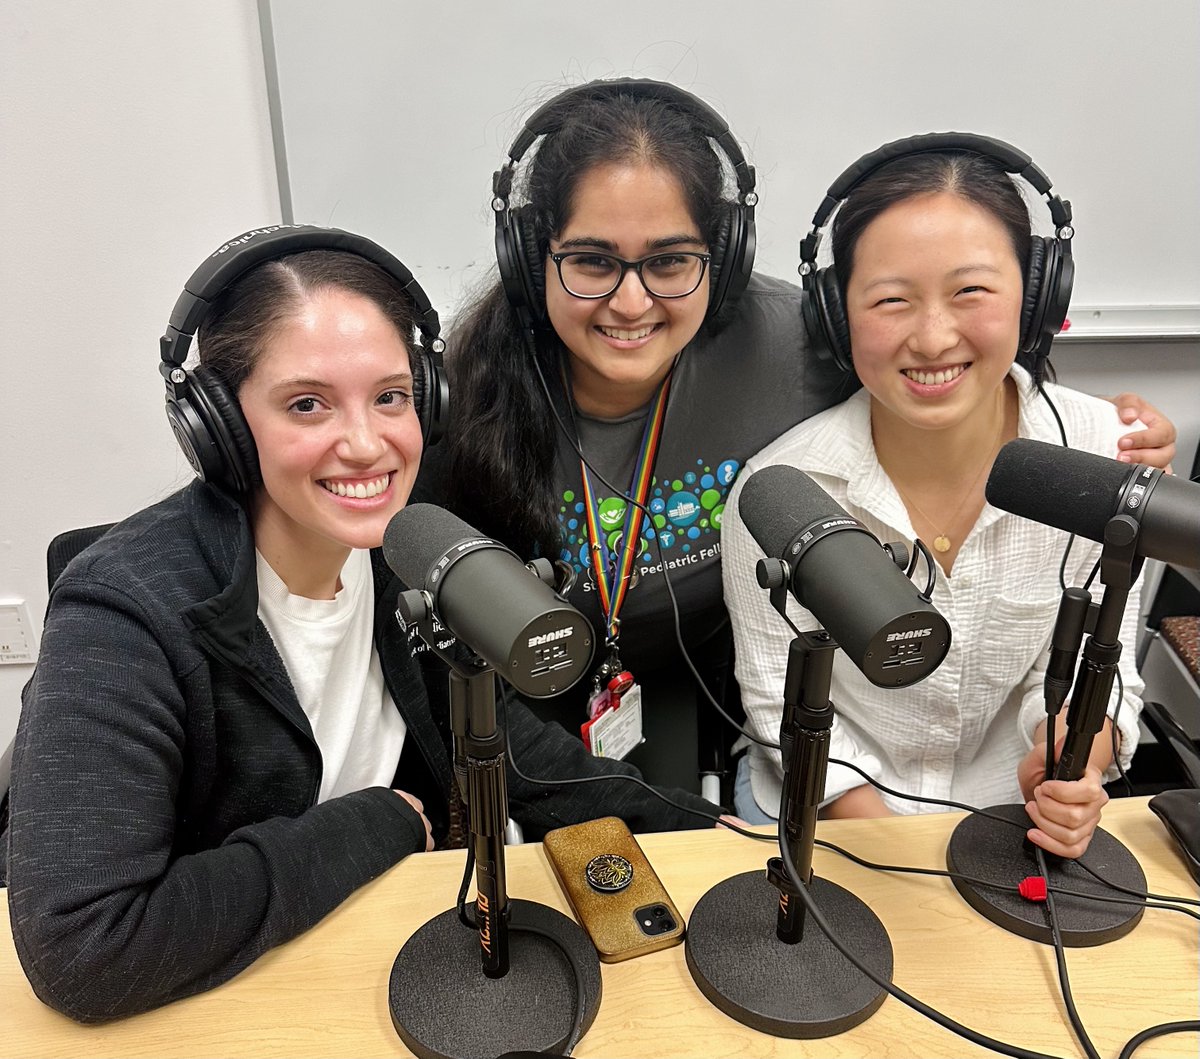 Our fabulous 3rd-year fellows @FaithMyersMD @SheilaRazdan @HannahGu15  spent some time in the 
@stanfordedtech recording studio 🎙️ today to talk about all things #Stanford neo fellowship. The bond between these 3 is palpable! 🥰 They've even dubbed themselves 'the blob.'